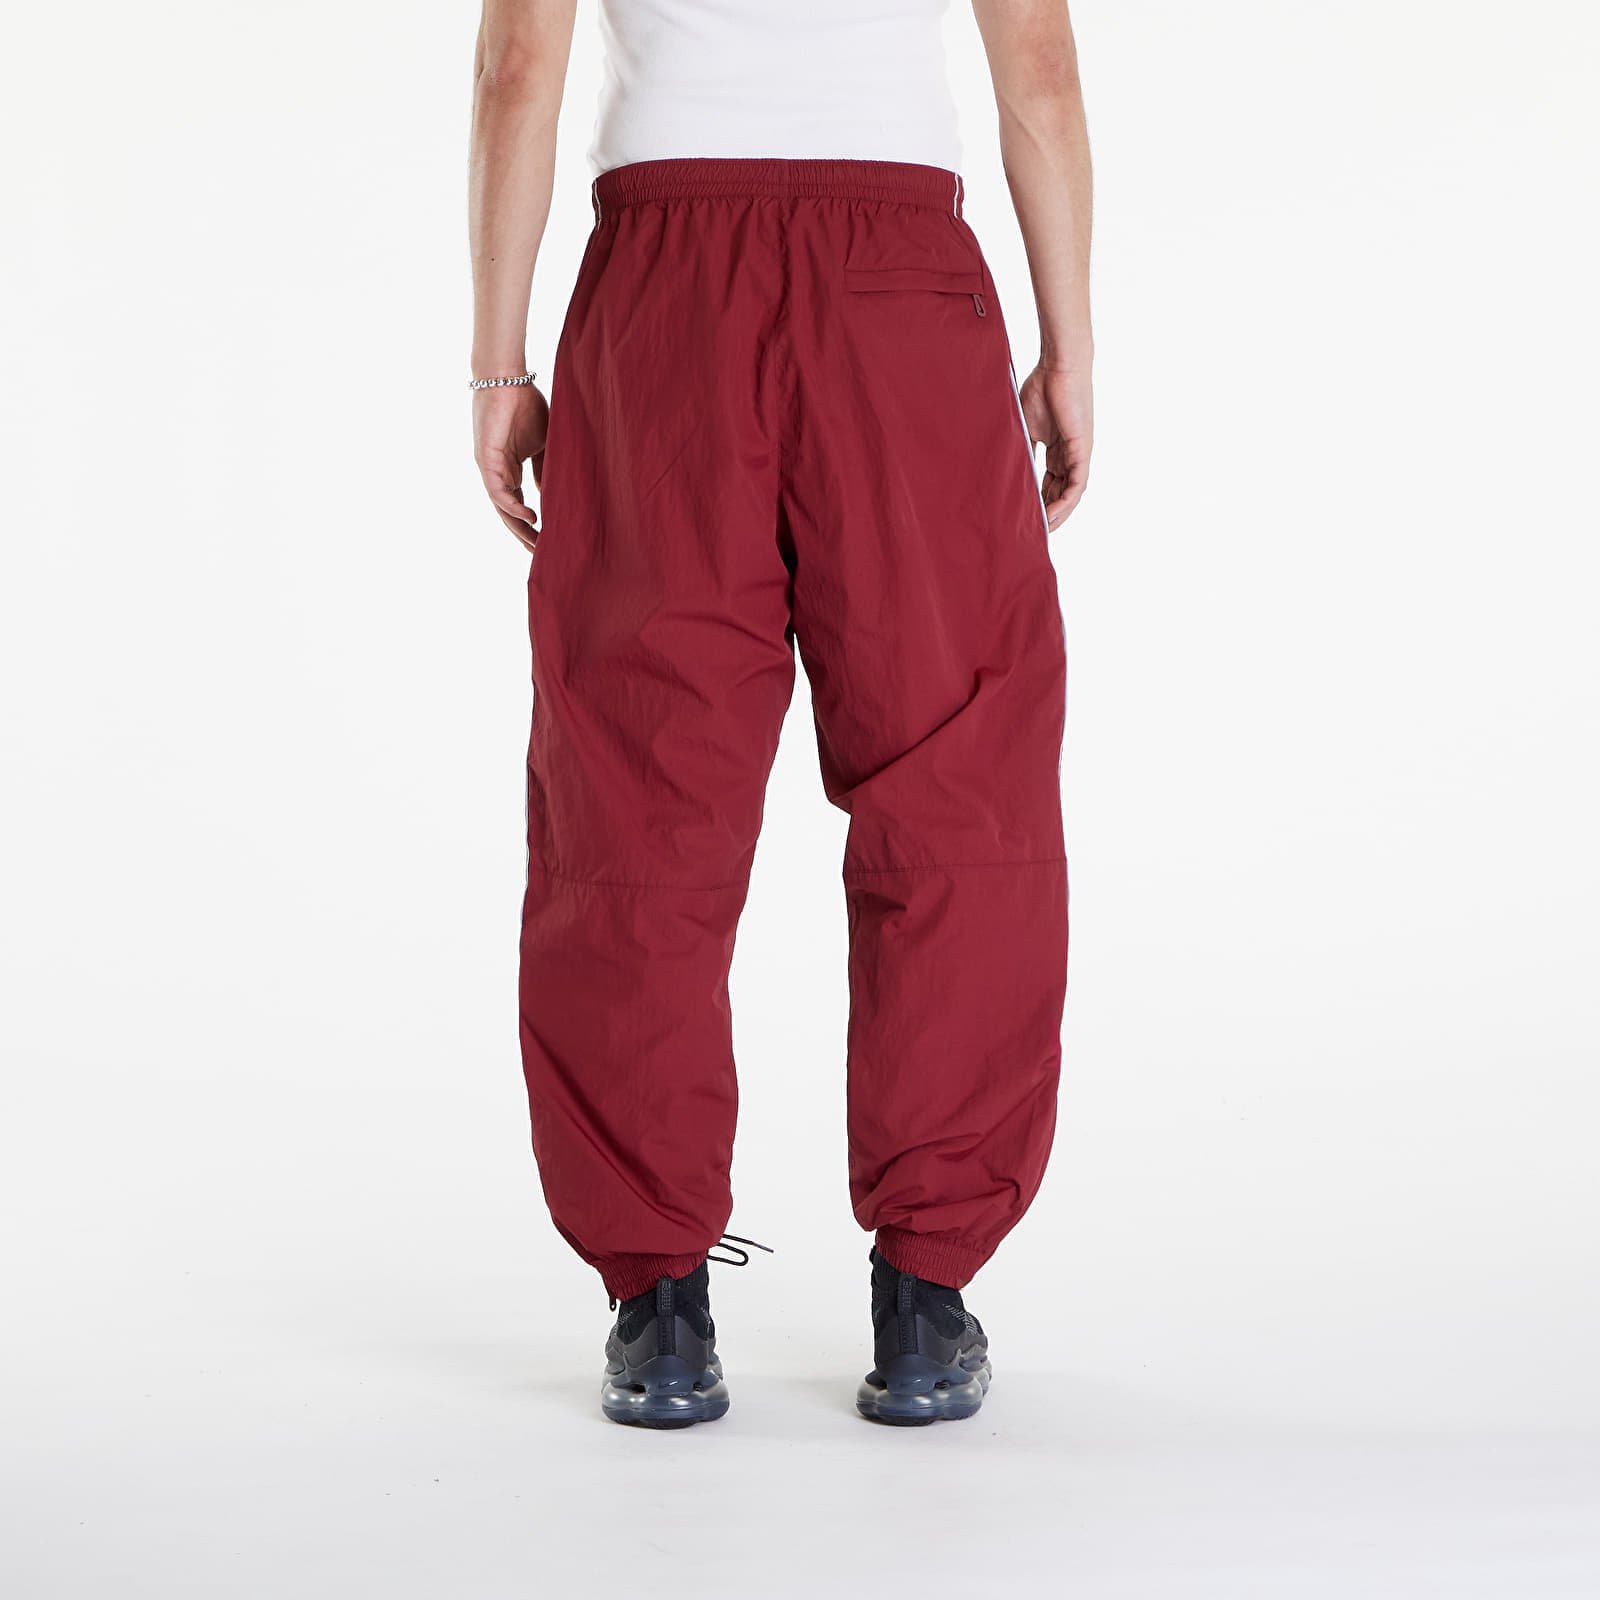 Solo Swoosh Track Pants Team Red/ White